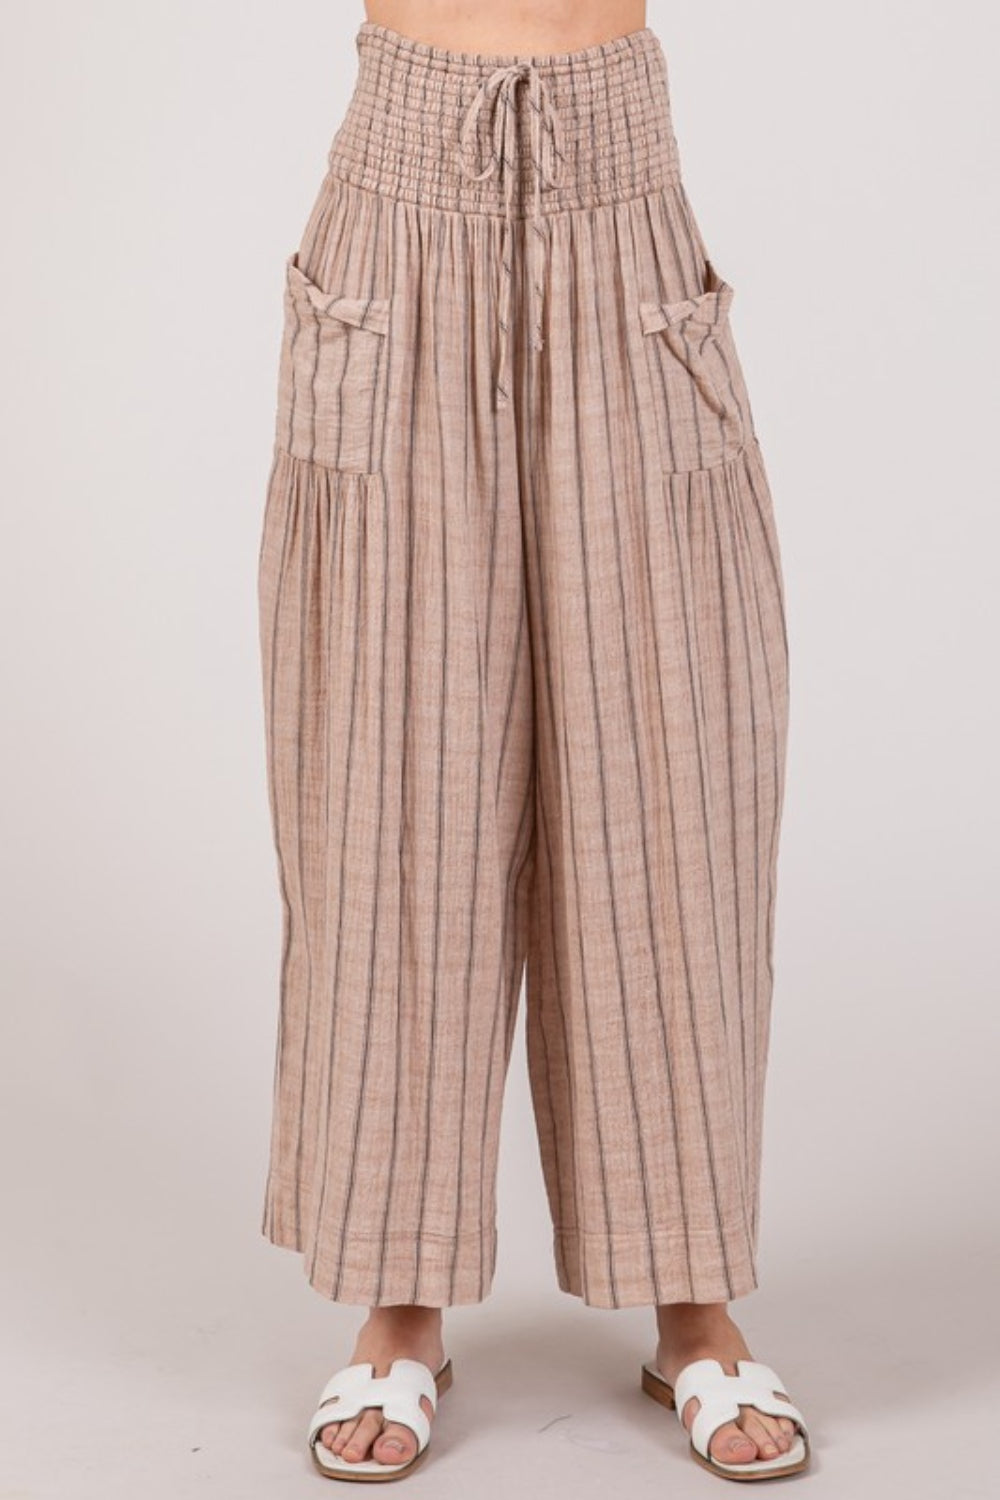 The Cotton Gauze Wash Stripe Pants are a comfortable and stylish choice for a casual and laid-back look. These pants feature a breathable cotton gauze fabric with a washed stripe pattern, adding a touch of texture and interest to your outfit. 